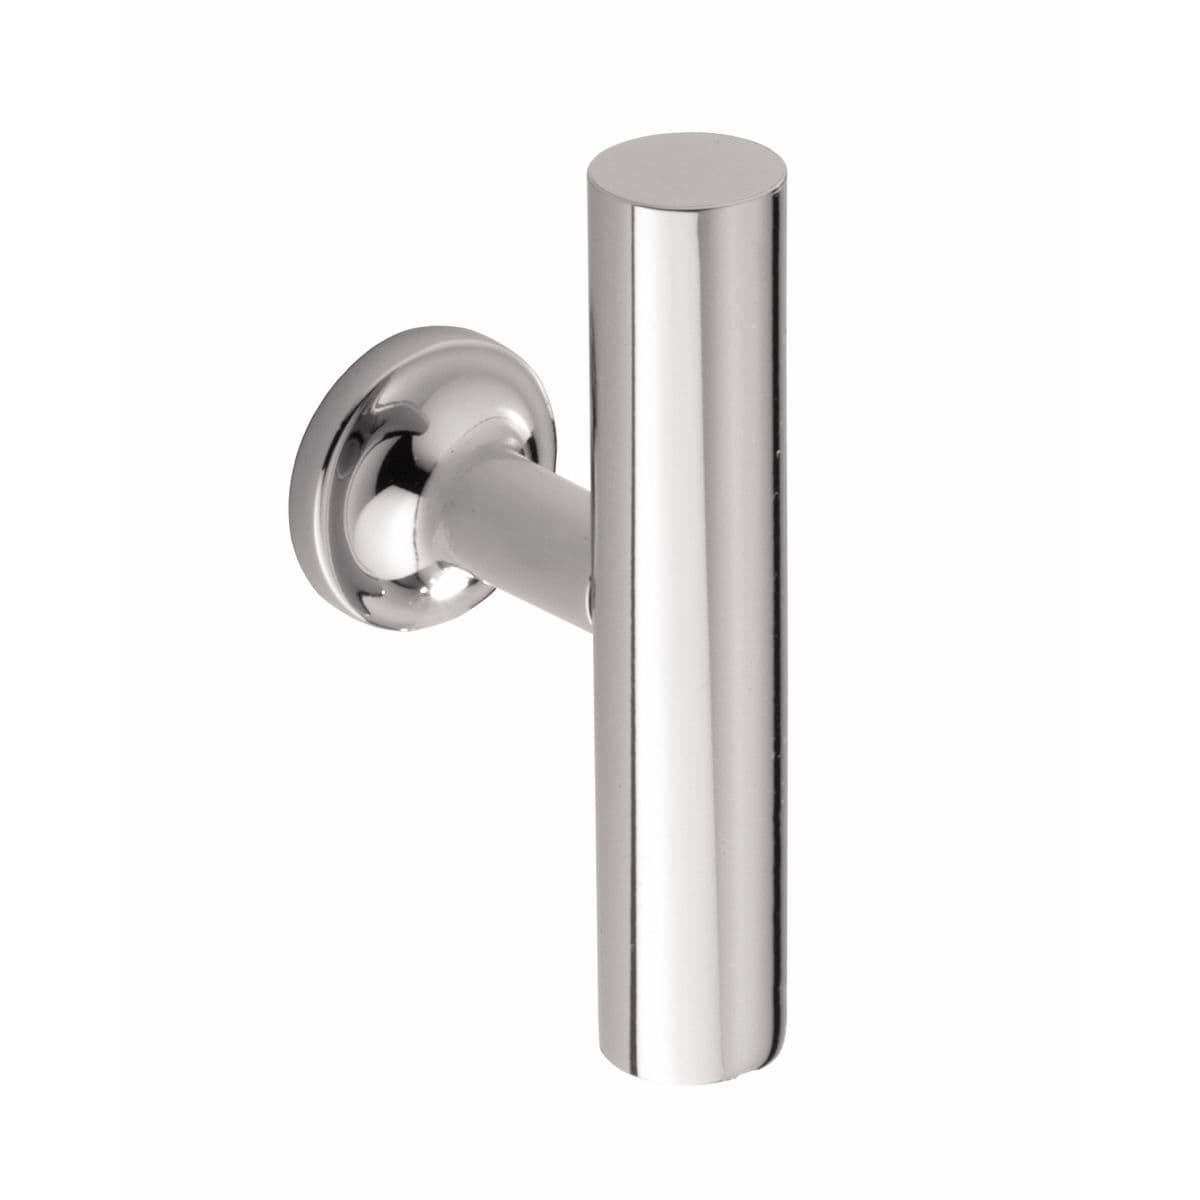 LINTON T KNOB Cupboard Handle - 60mm long - POLISHED CHROME finish (PWS H1120.60.CH)